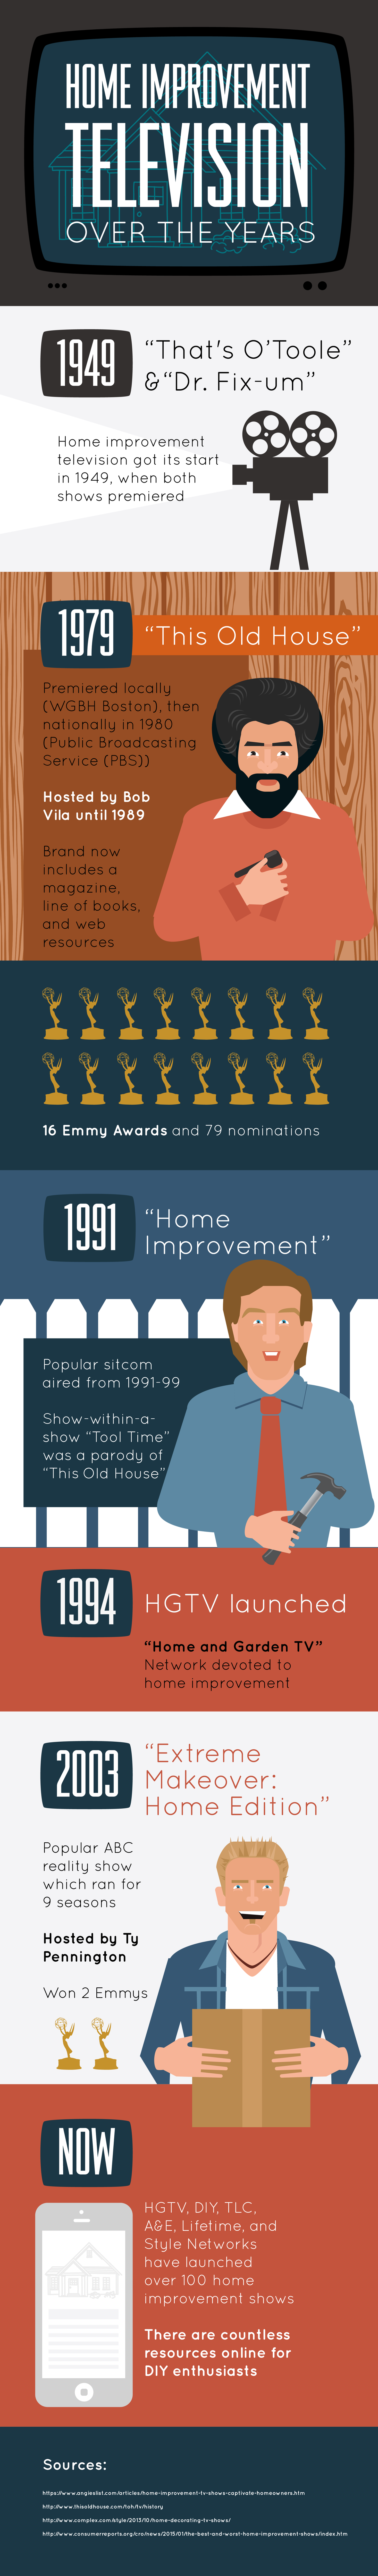 Infographic about different home improvement TV shows.